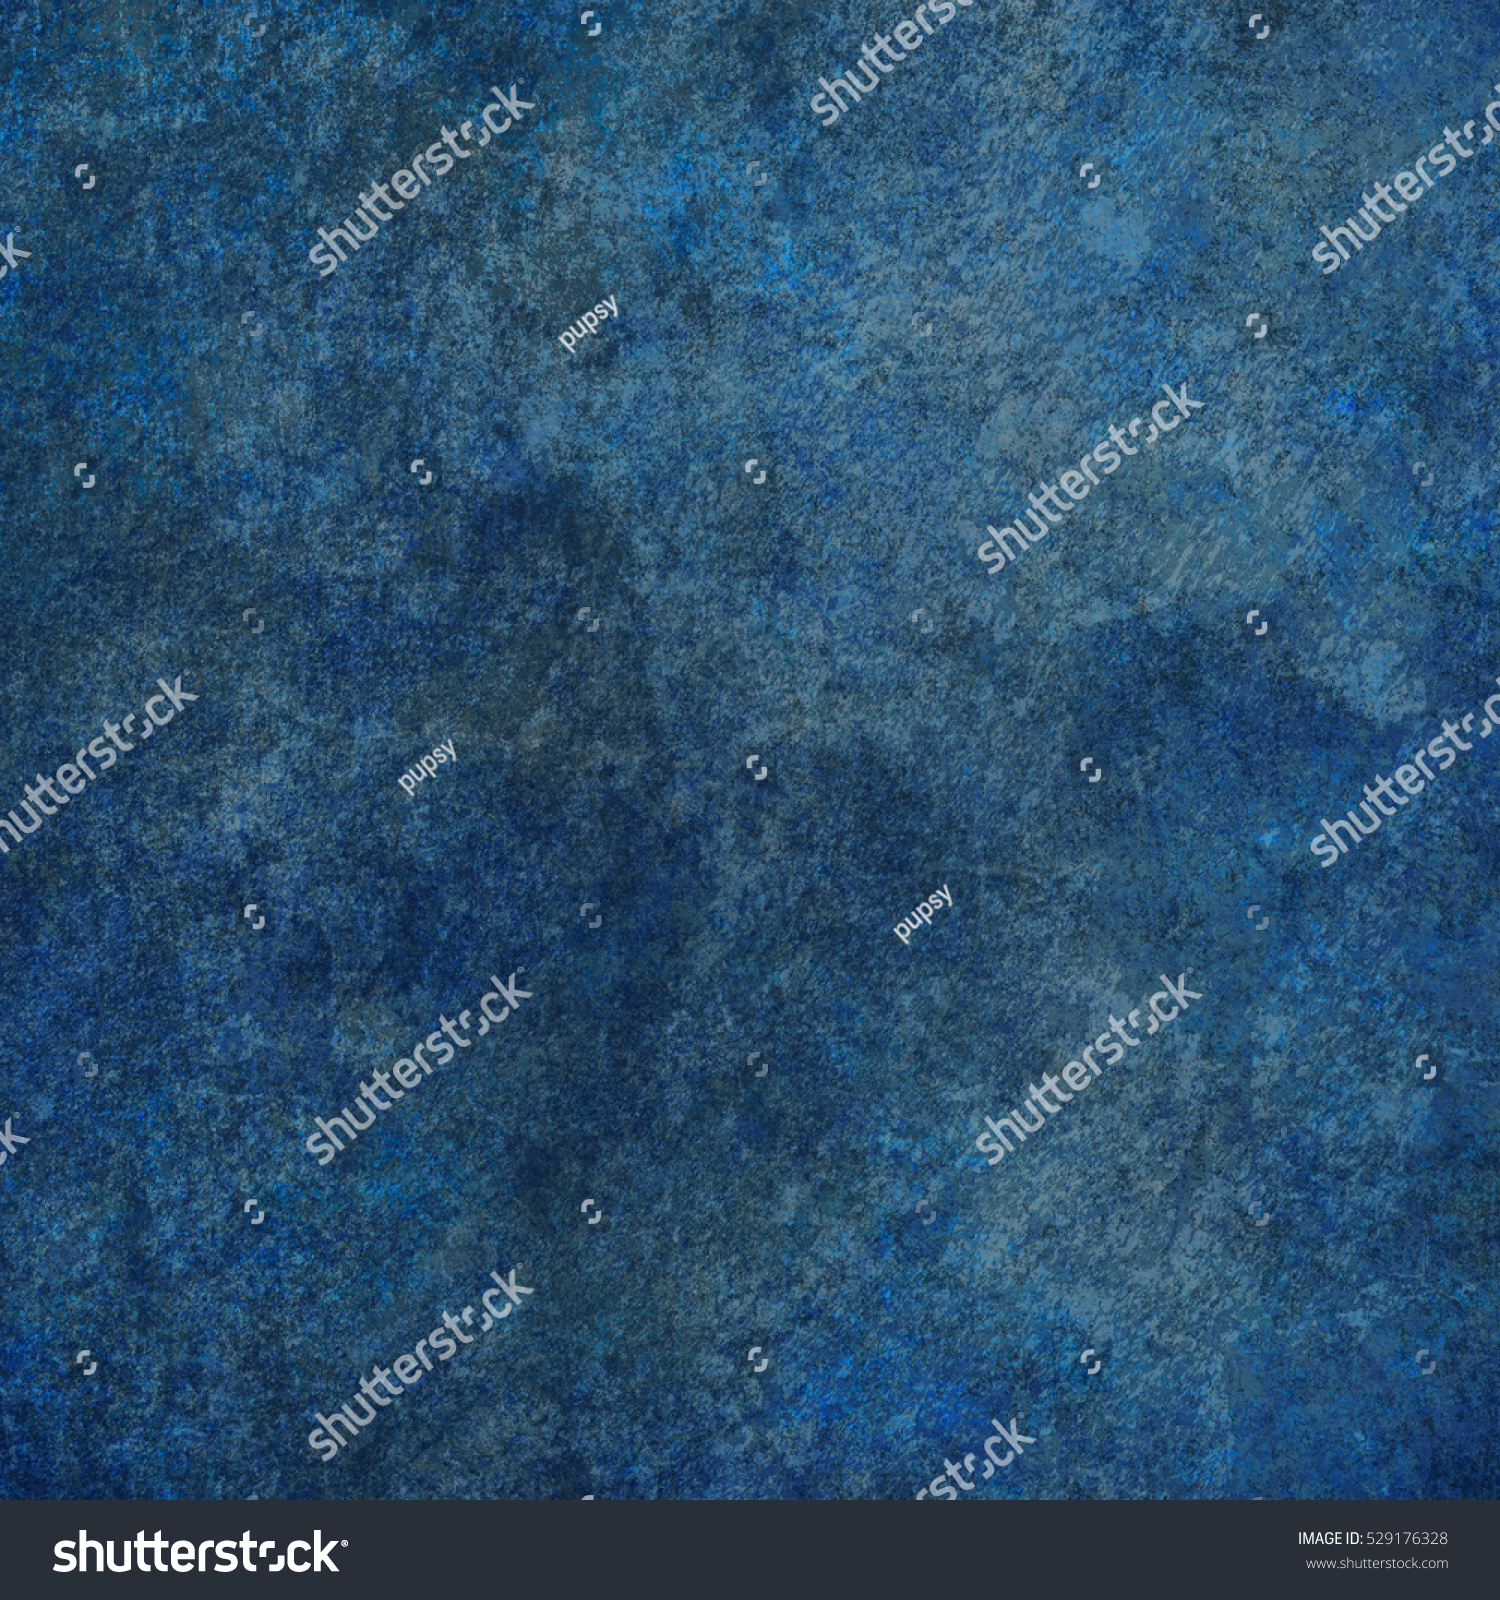 Blue designed grunge texture. Vintage background with space for text or image #529176328